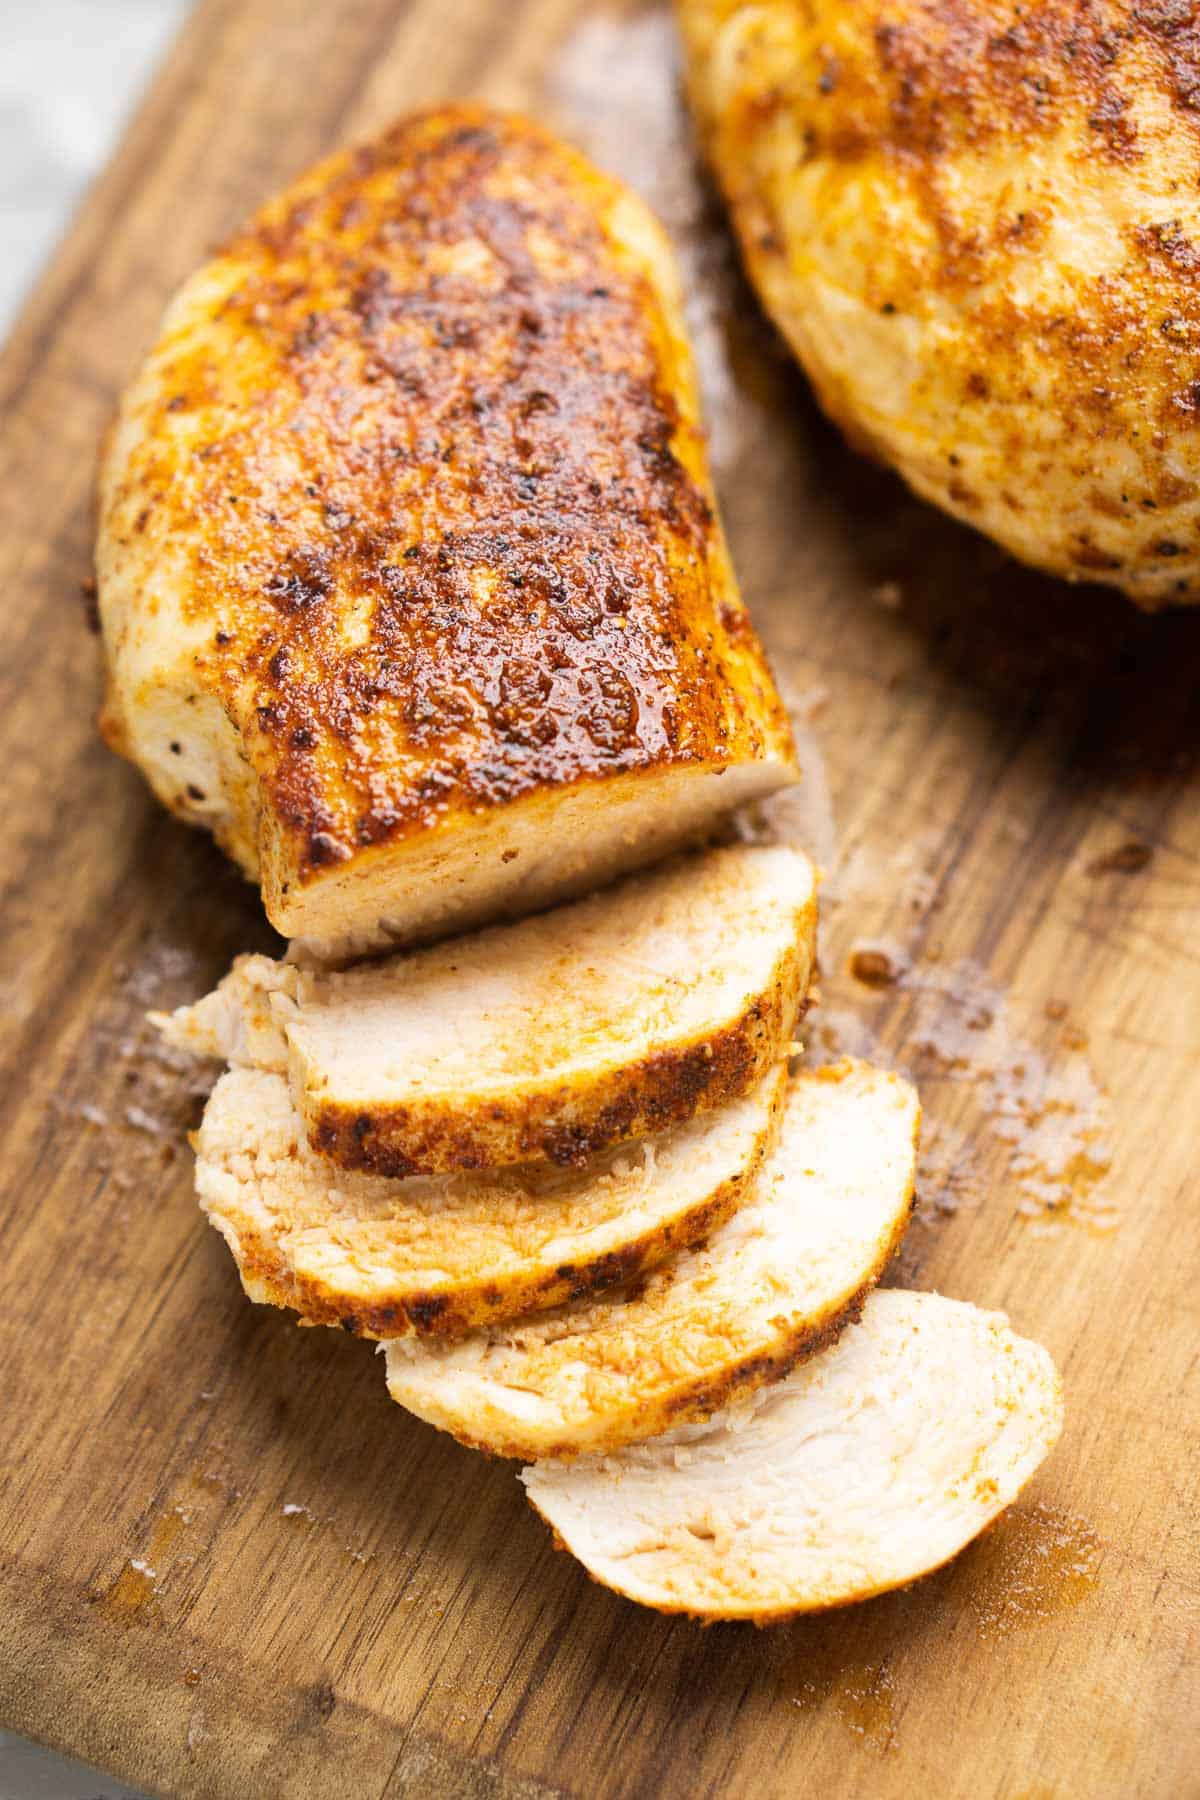 Partially sliced air fryer chicken breast on wooden cutting board